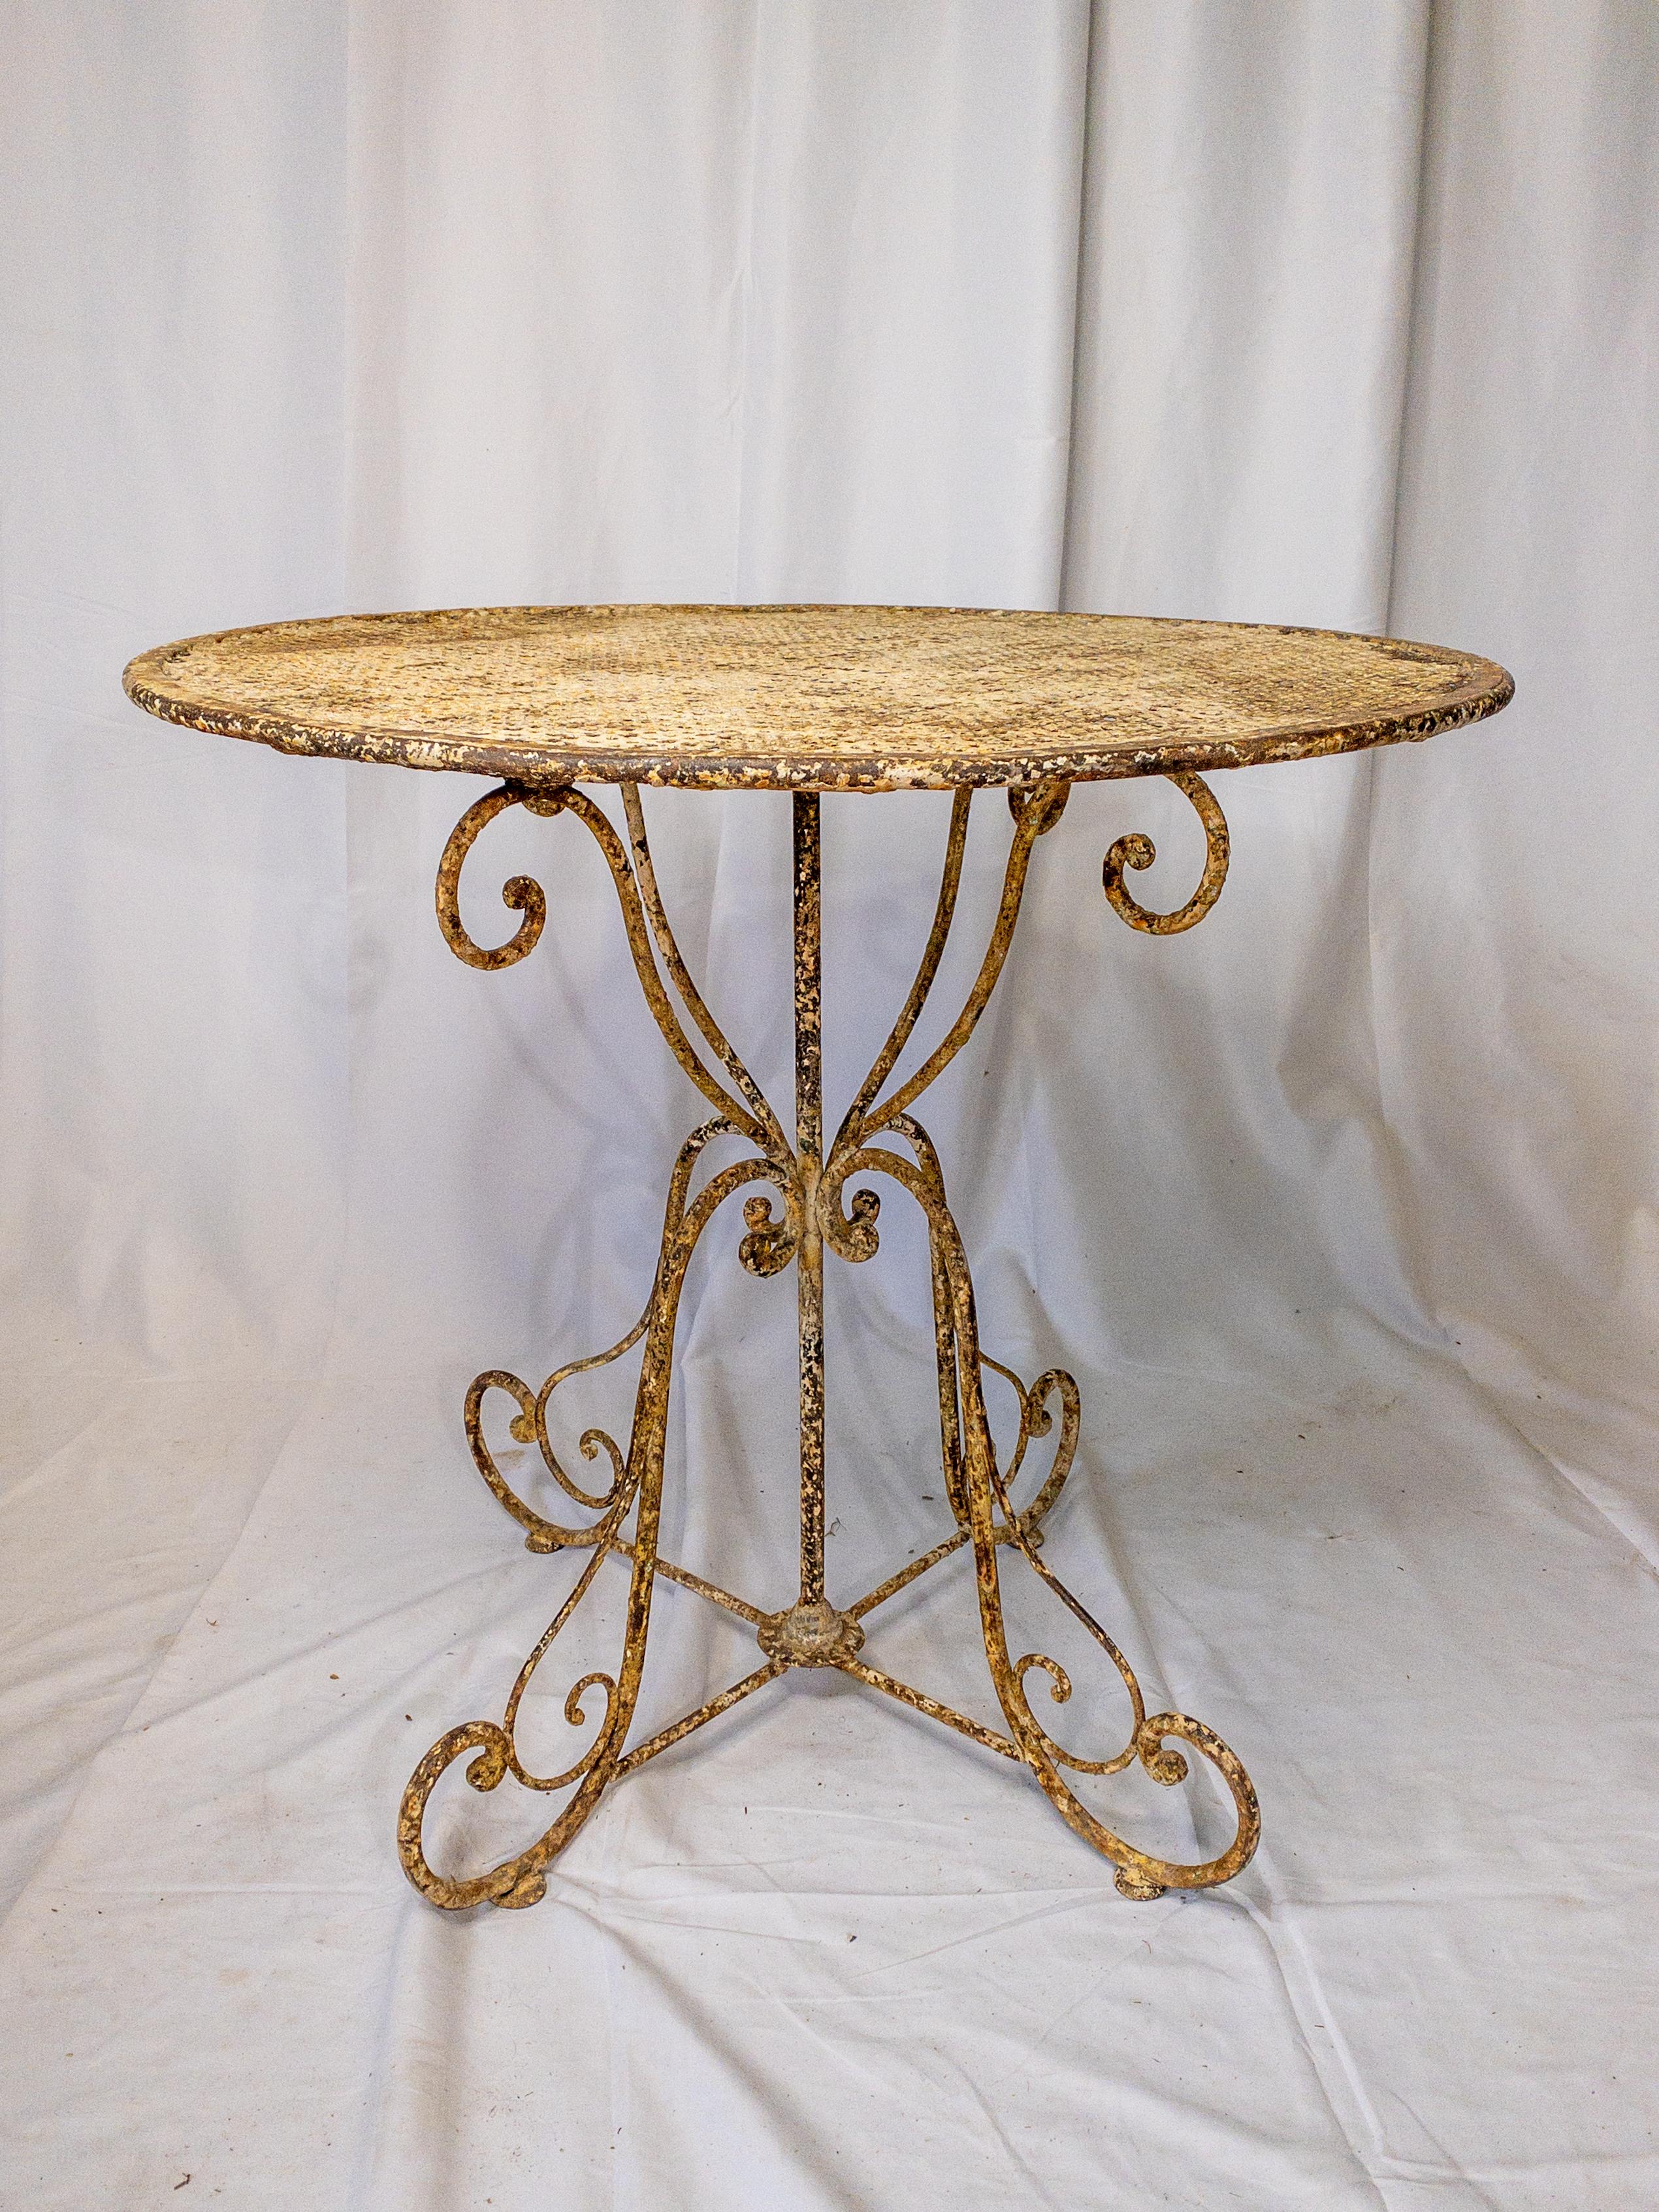 19th Century French Napoleon III Period Wrought Iron Garden Table For Sale